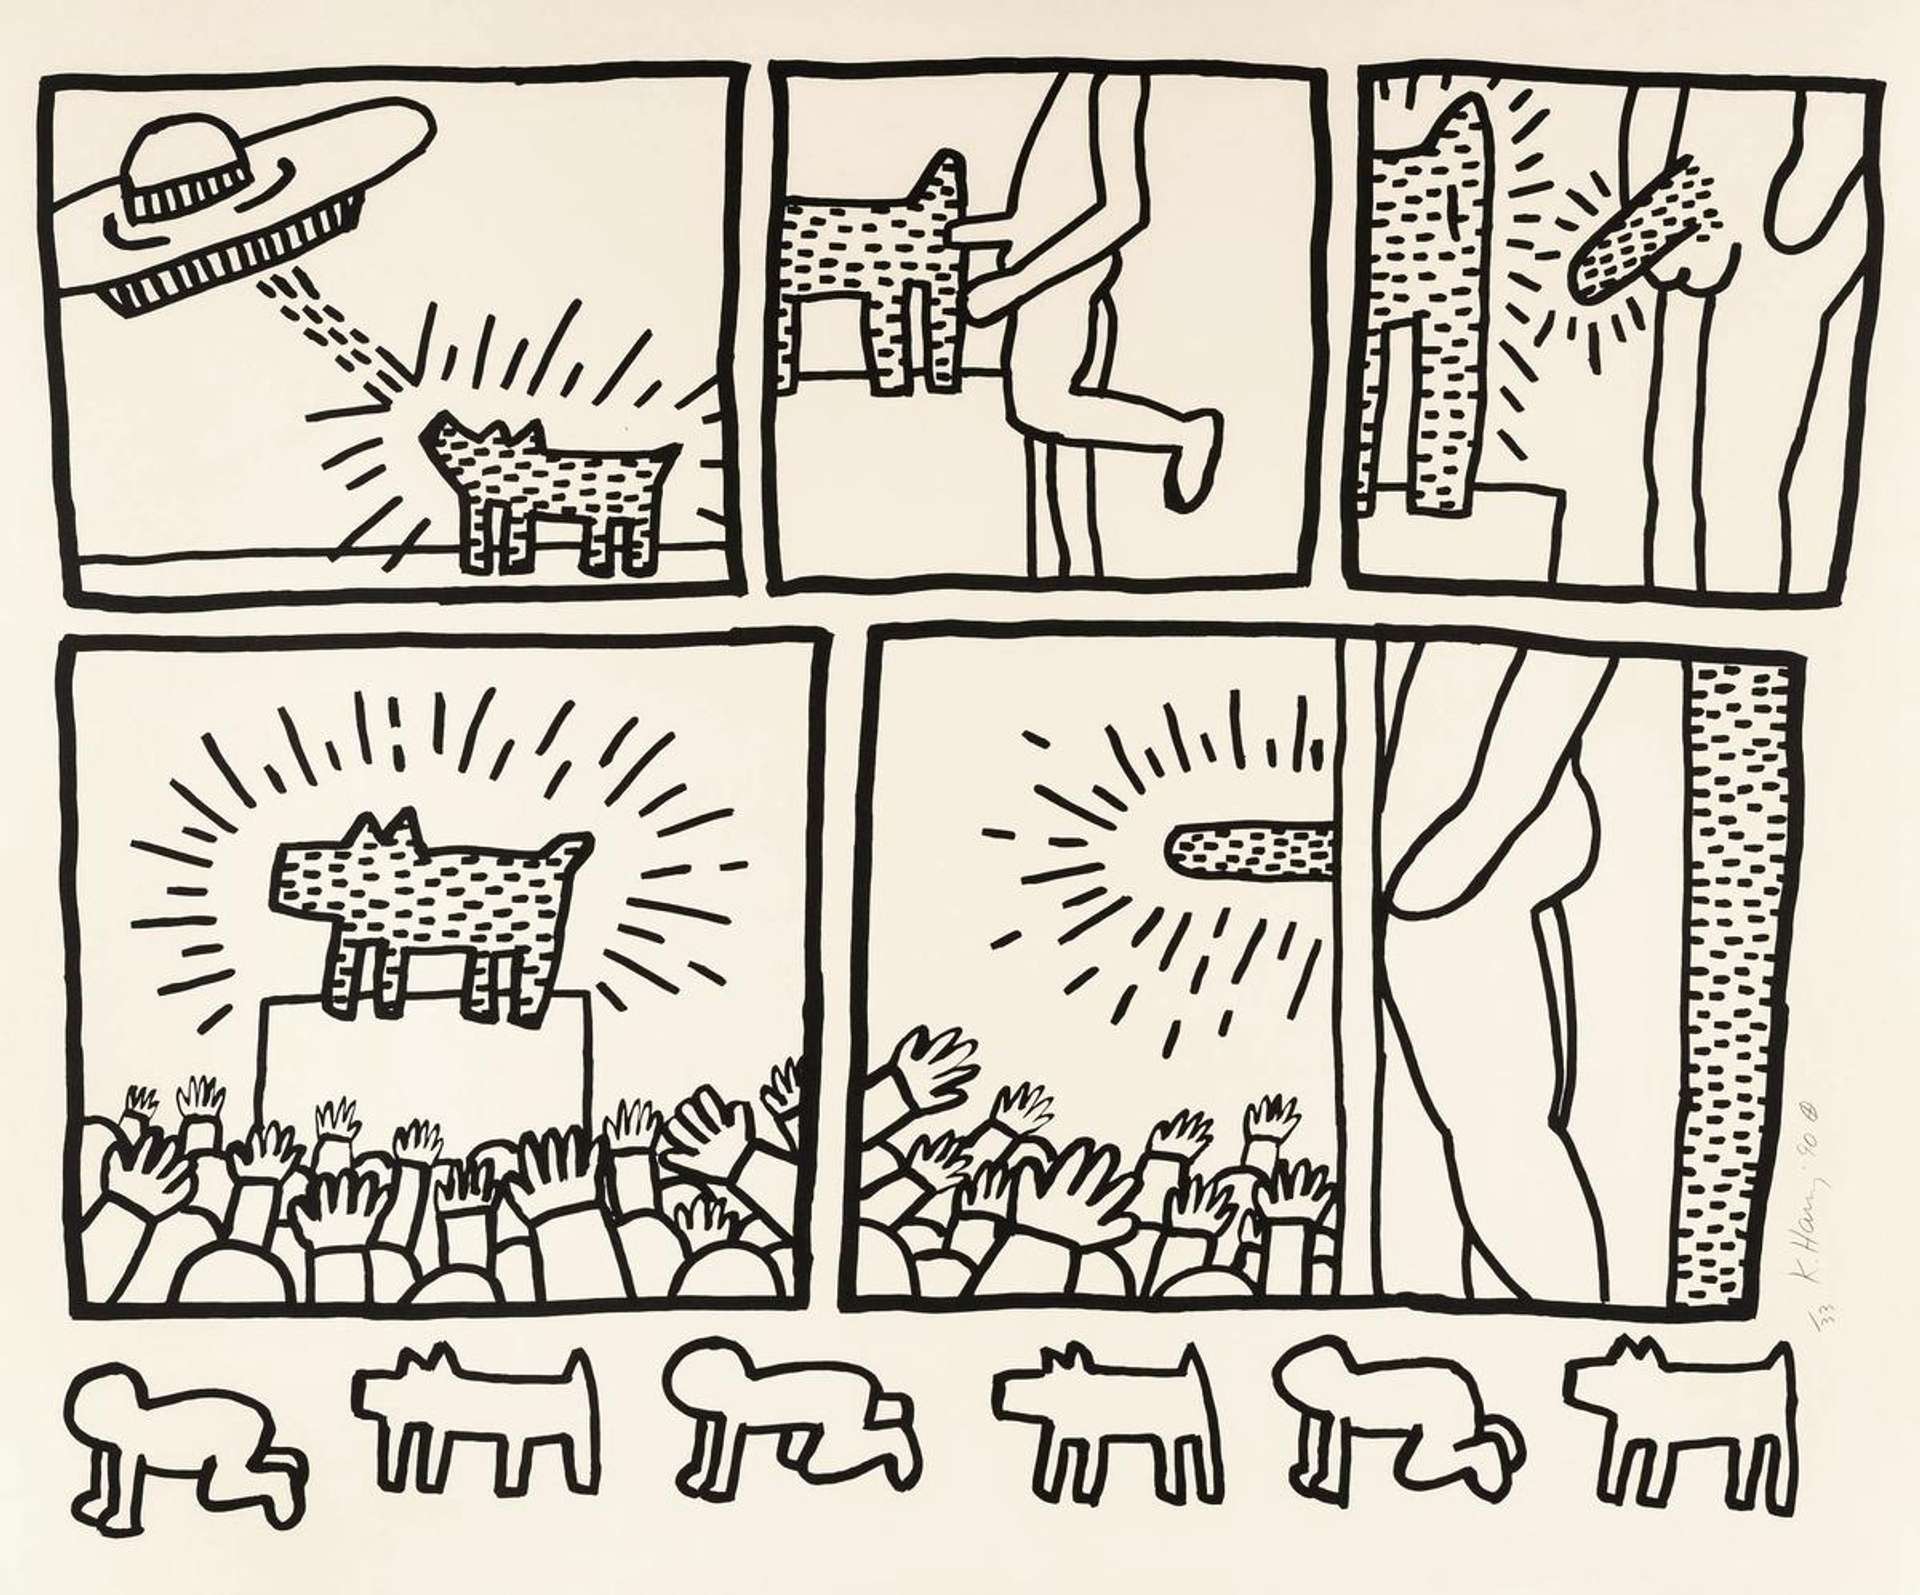 Keith Haring’s The Blueprint Drawings 13. A Pop Art screenprint of a black and white comic strip of various scenes including a nude male figure standing over a crowd.